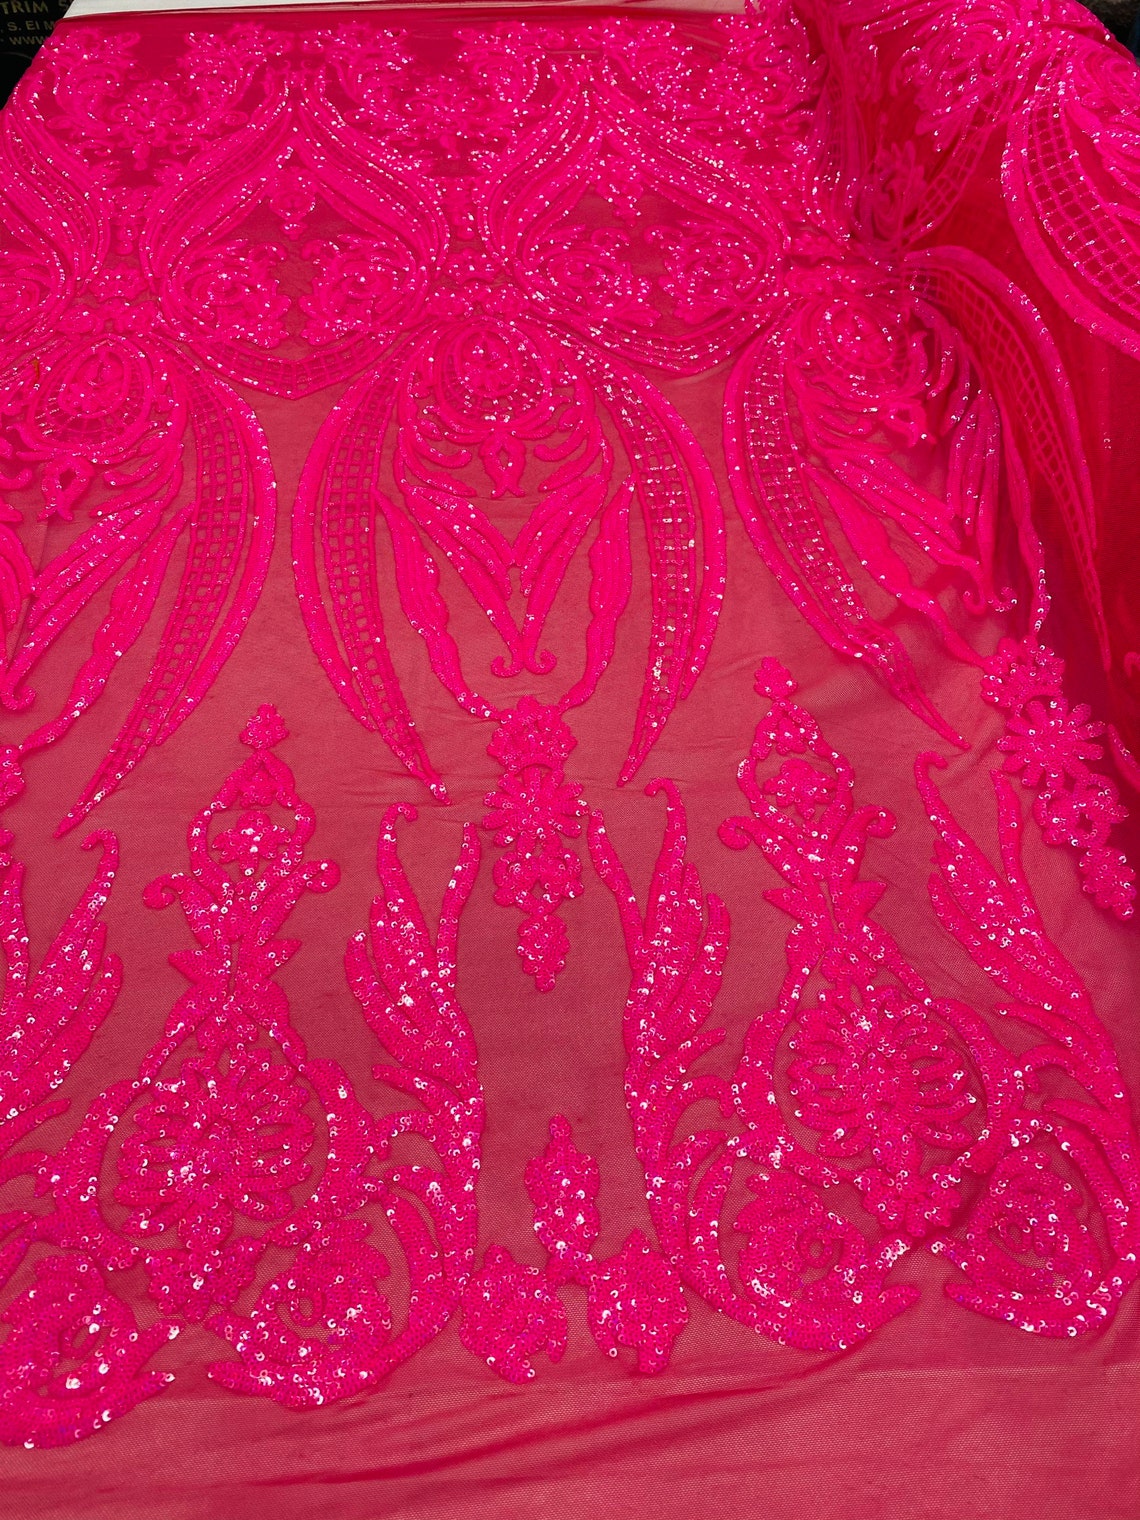 Neon Hot Pink Embroidered Sequins Fabric 4 Way Stretch Fancy - Etsy